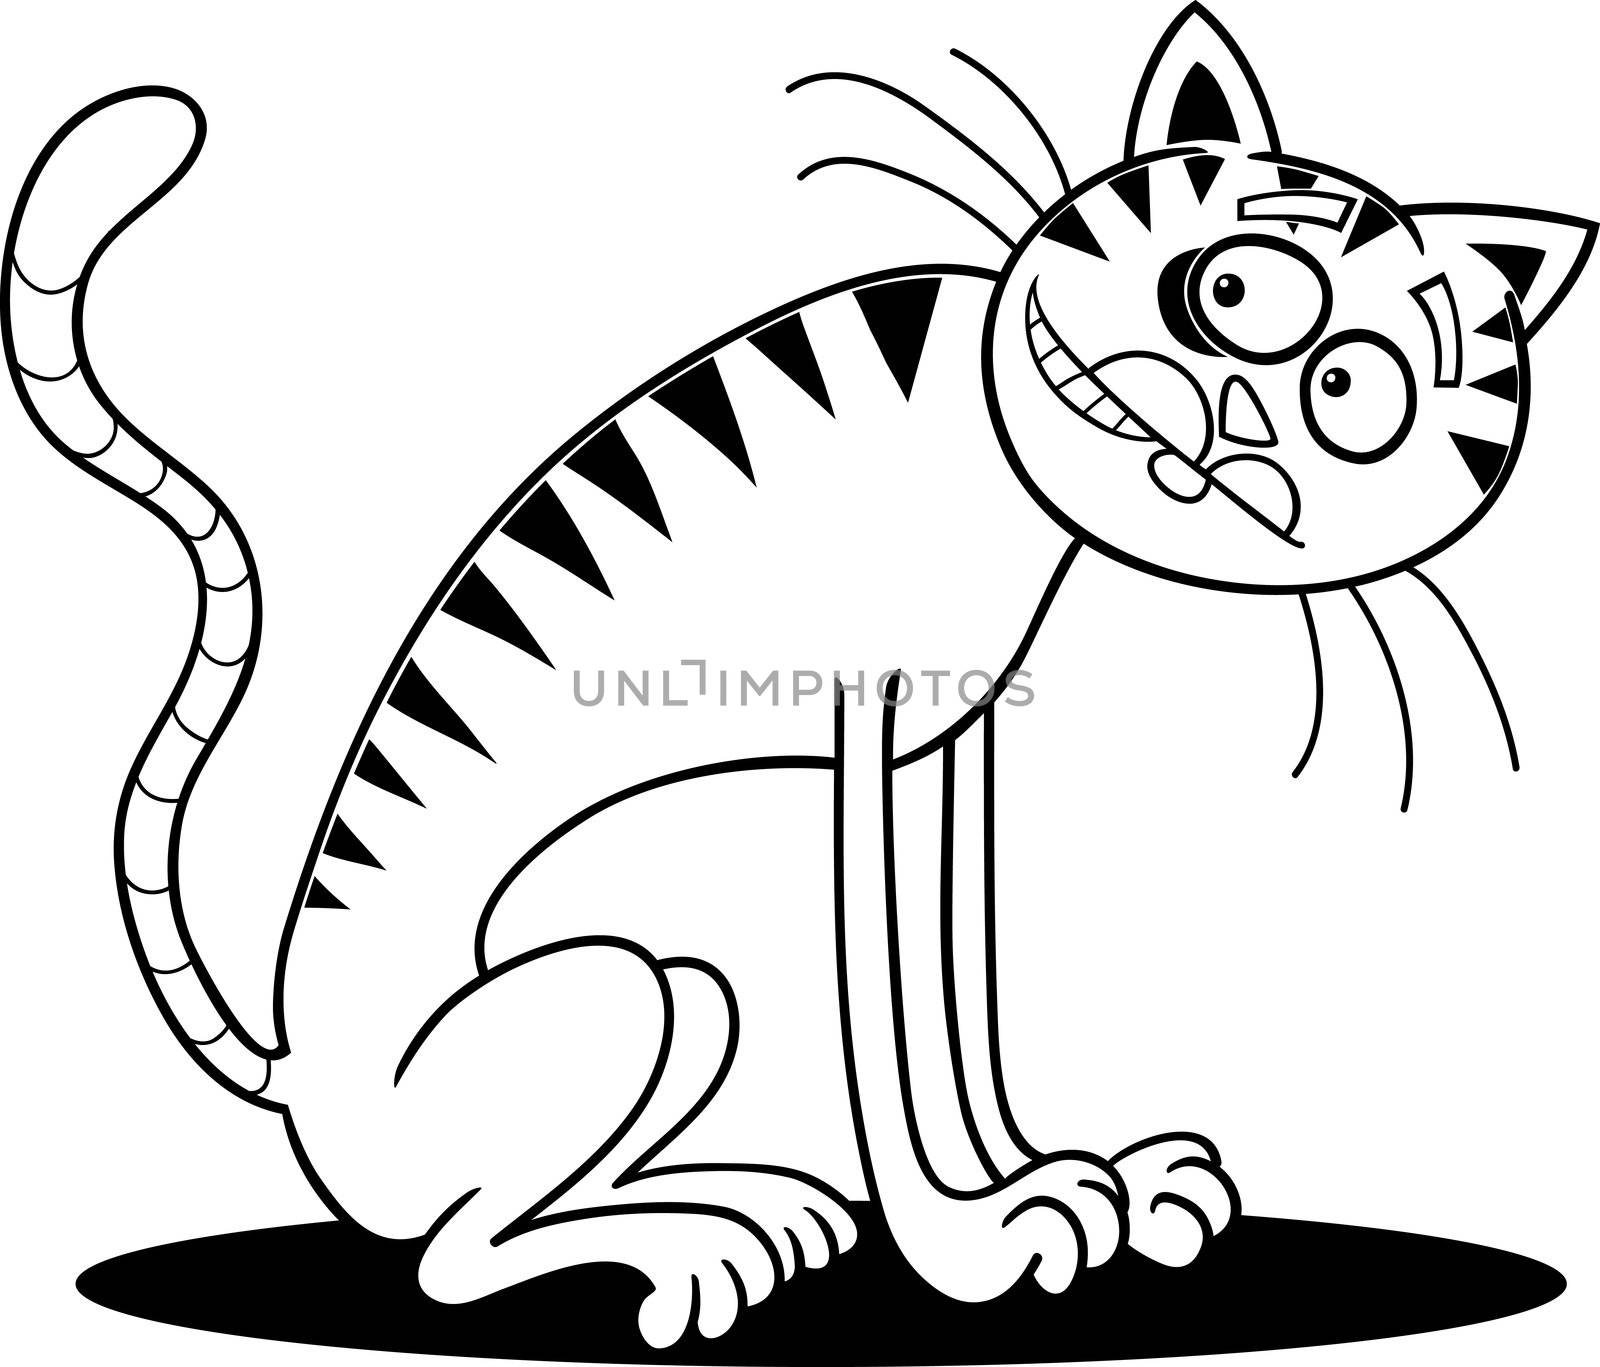 cartoon illustration of thin cat for coloring book